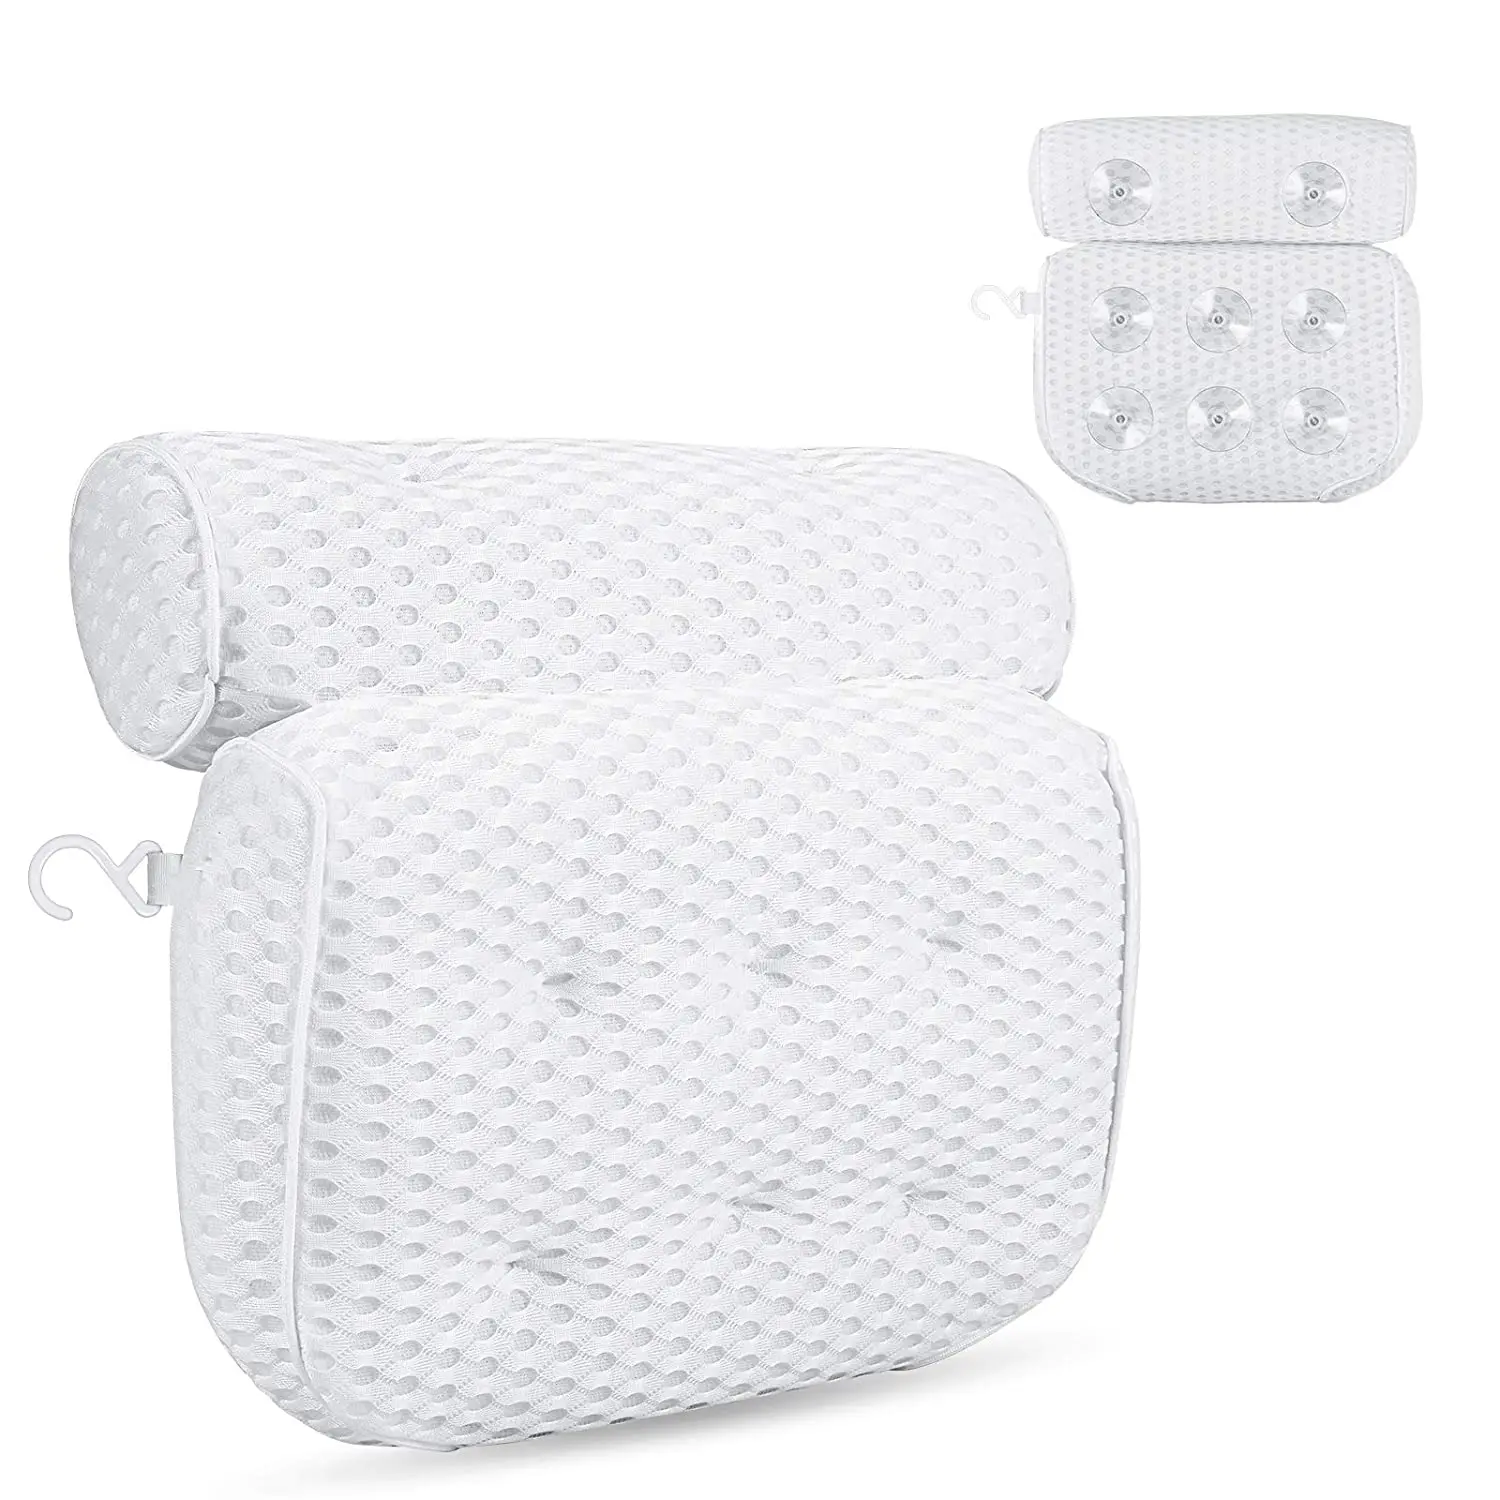 

Bath pillow 5D for Bathtub for Adults Head Neck Shoulder Back Lumbar Support 4D Mesh Spa Pillows with 7 Suck, White